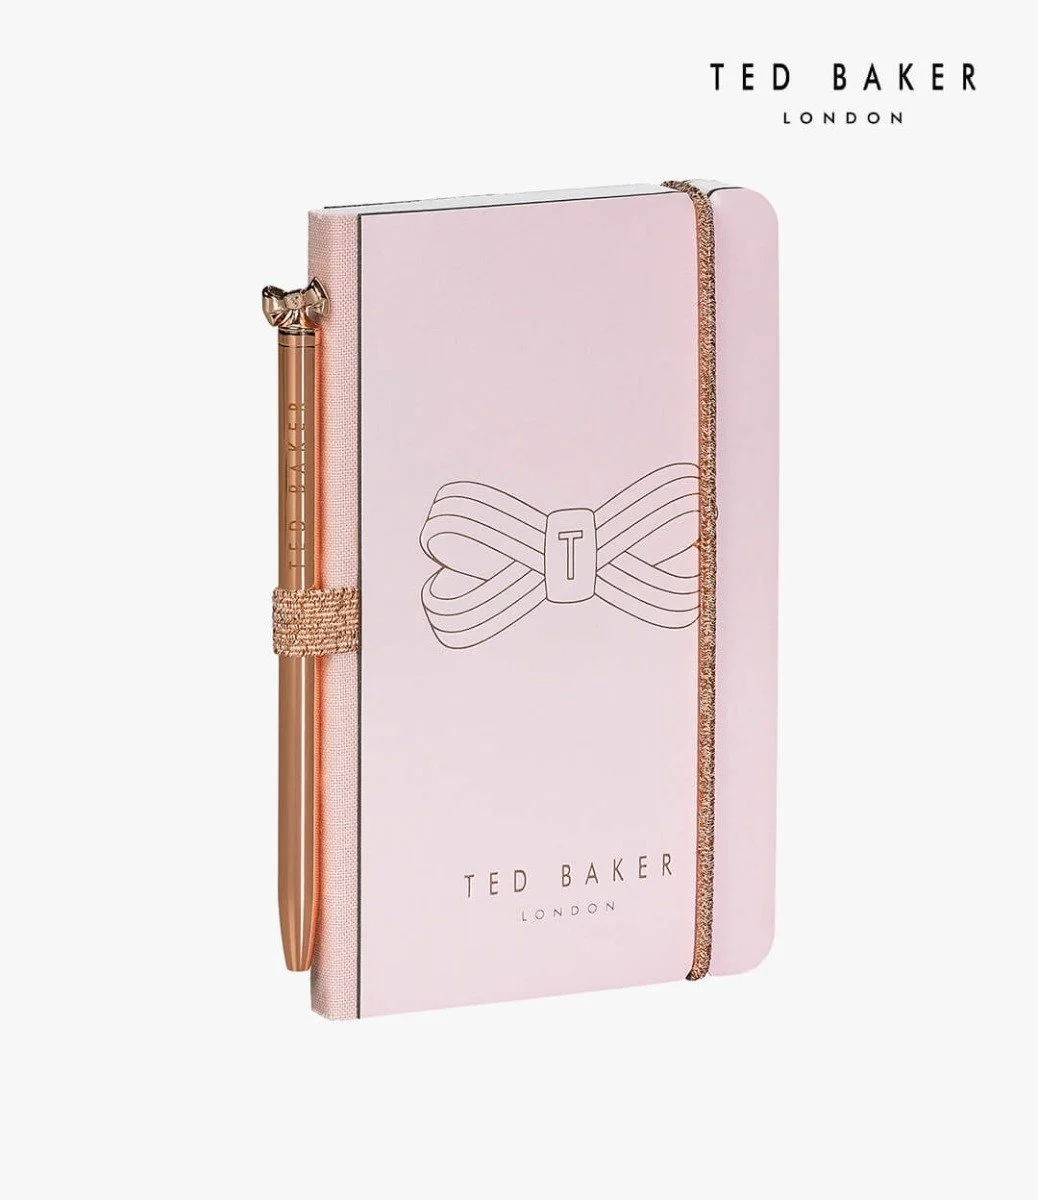 Pink Bow Mini Notebook & Pen by Ted Baker